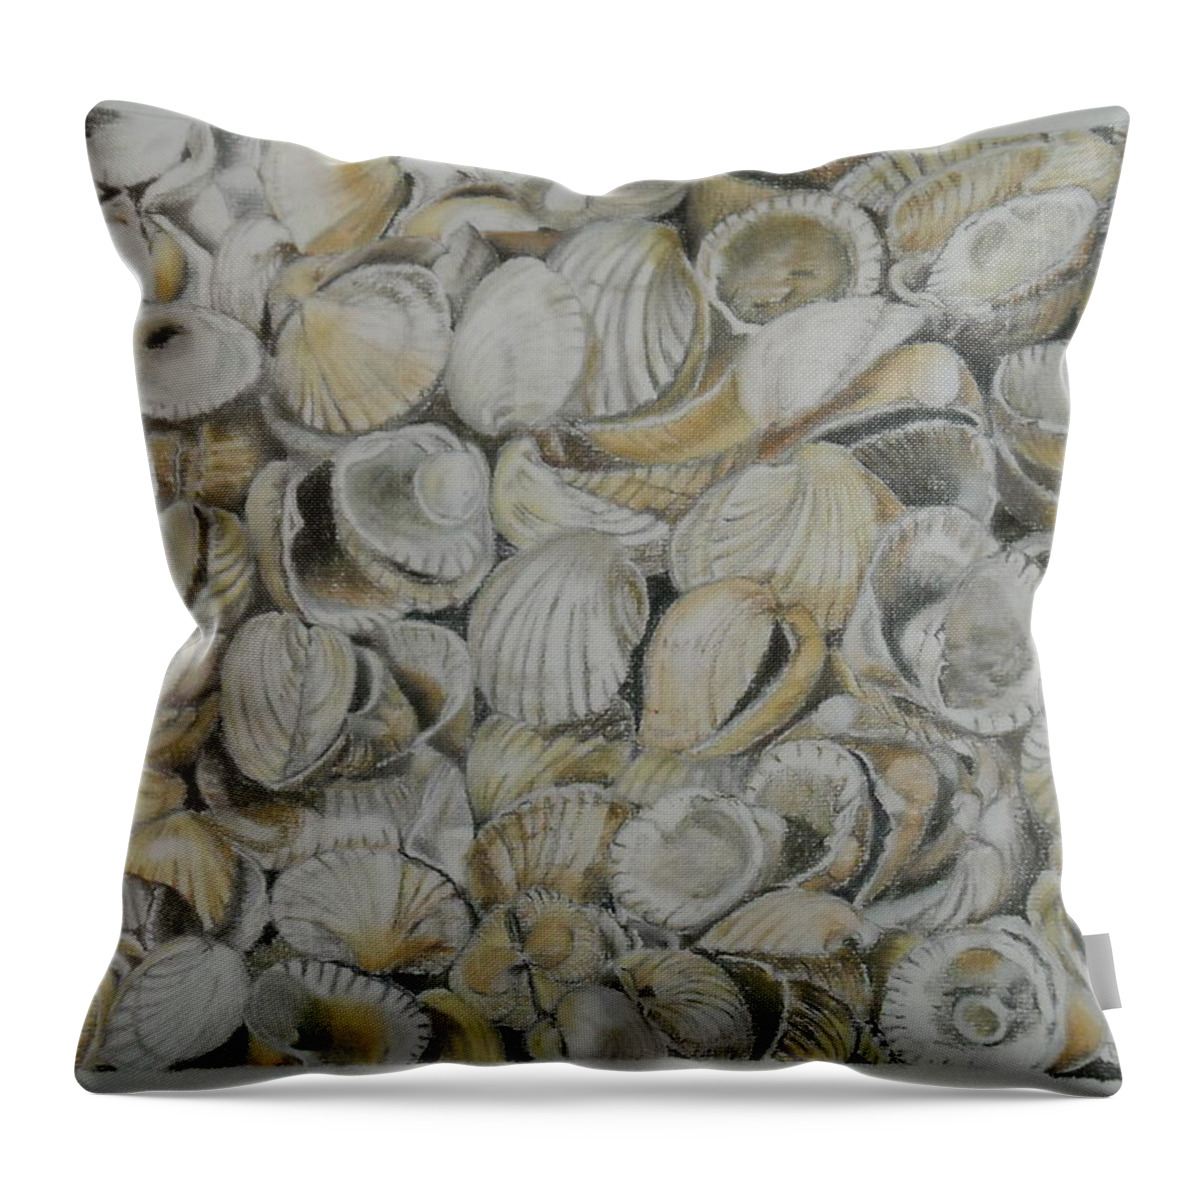 Shells Throw Pillow featuring the pastel Cockle Shells by Teresa Smith